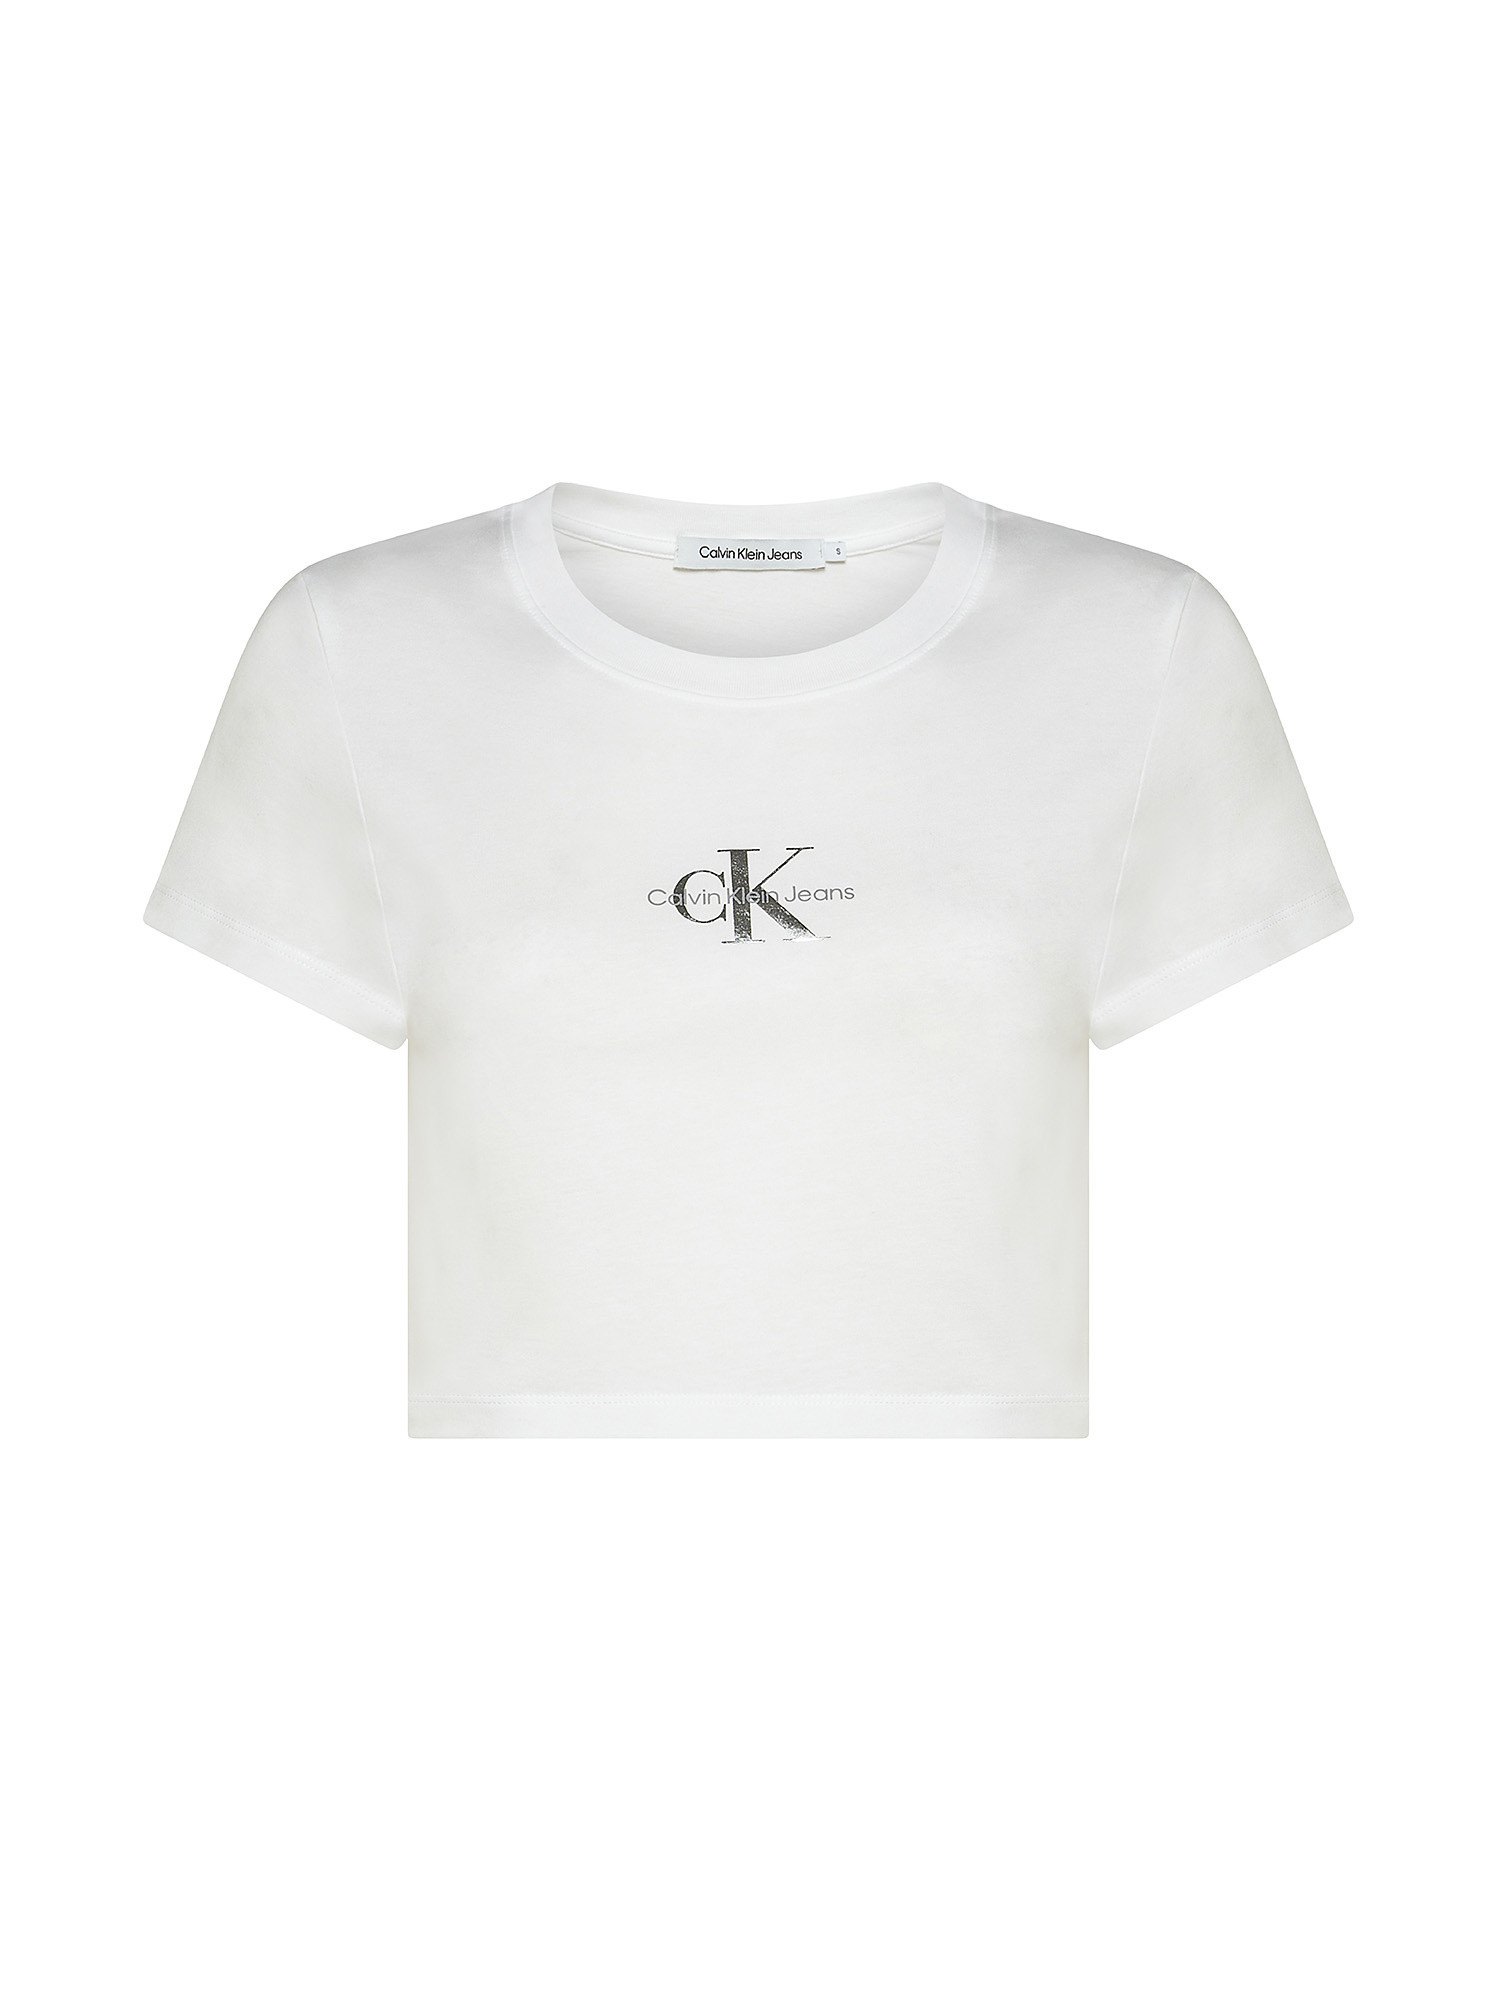 Crop-top with logo, White, large image number 0